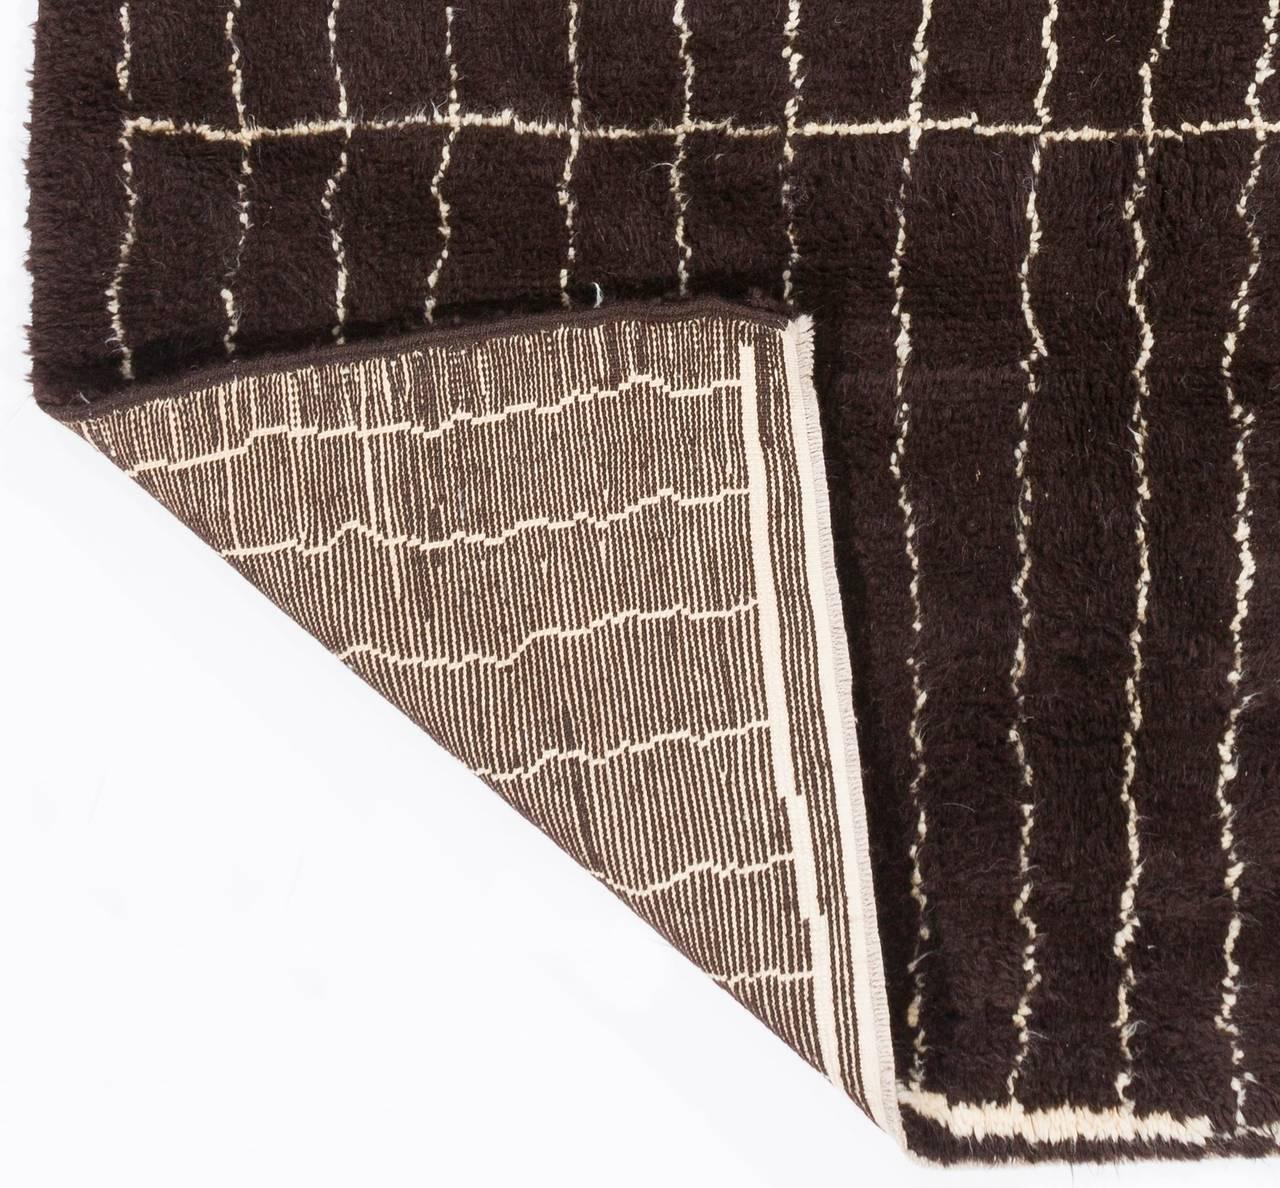 A Moroccan Berber design contemporary hand-knotted rug made of organic sheeps' wool in its original, un-dyed shades of very dark brown and cream, featuring a design of slightly crooked lines running across the length of the field with small lozenges